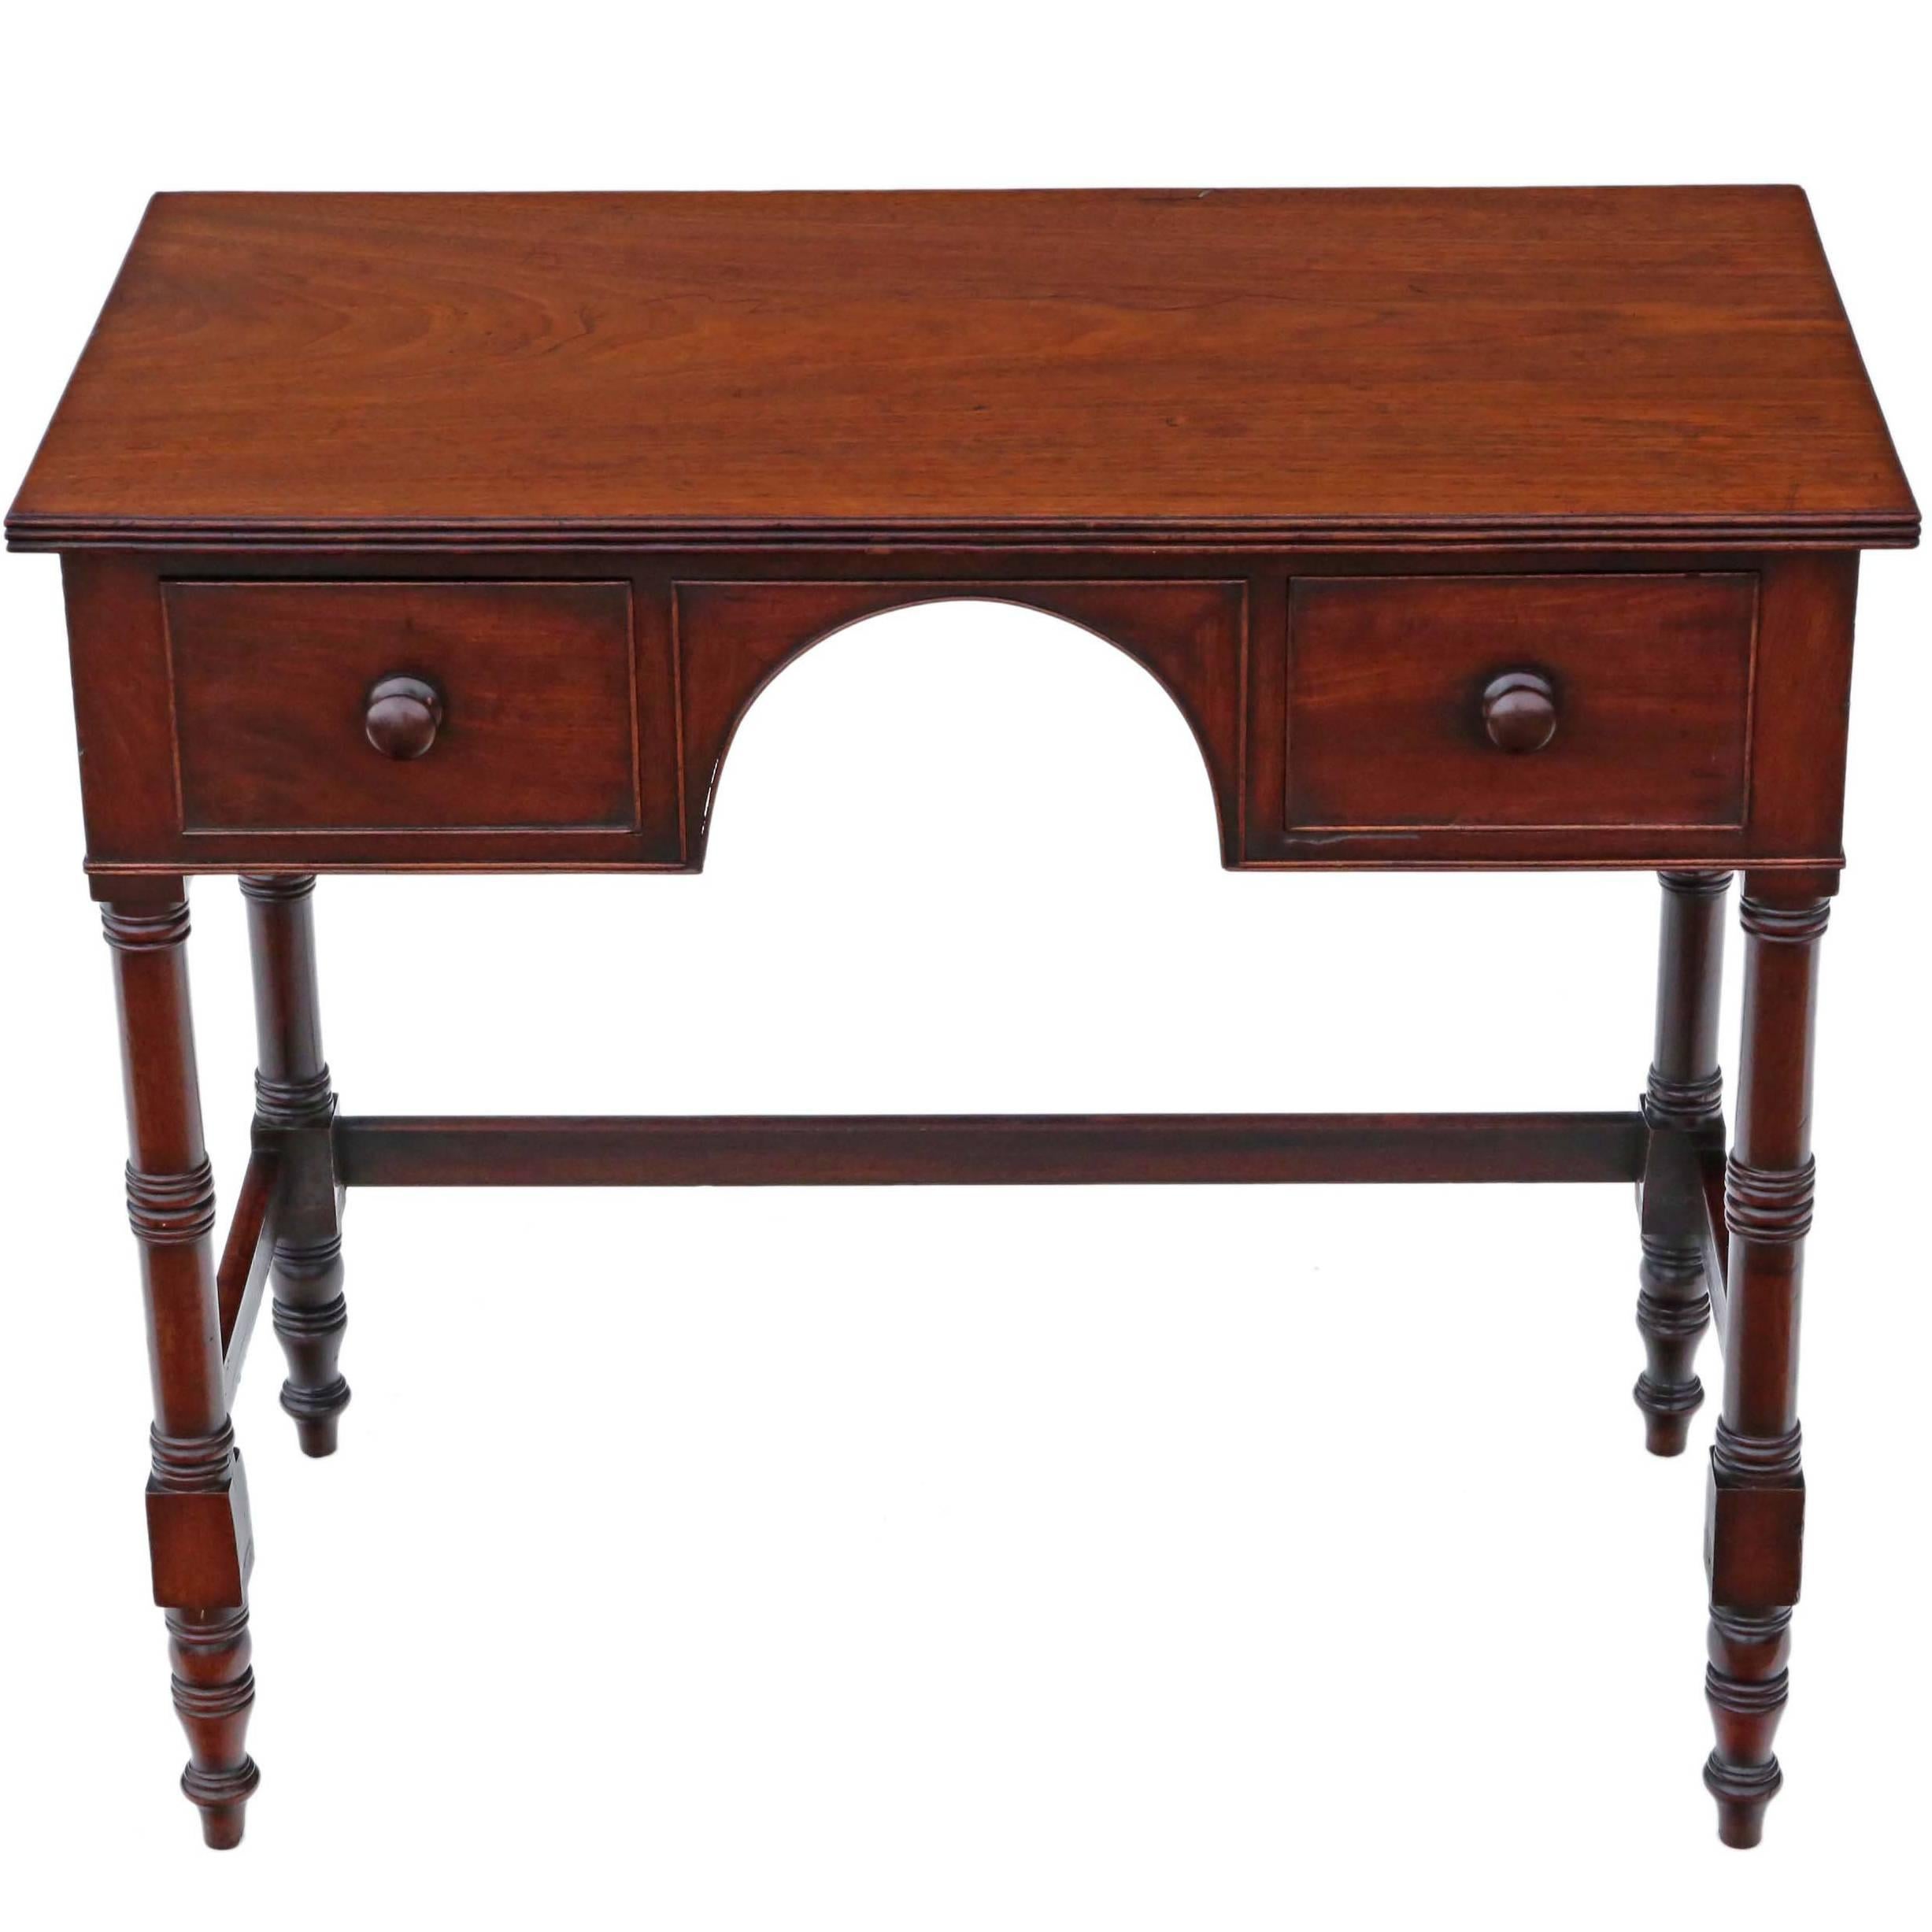 Antique Regency circa 1825 and Later Mahogany Desk or Writing Table For Sale